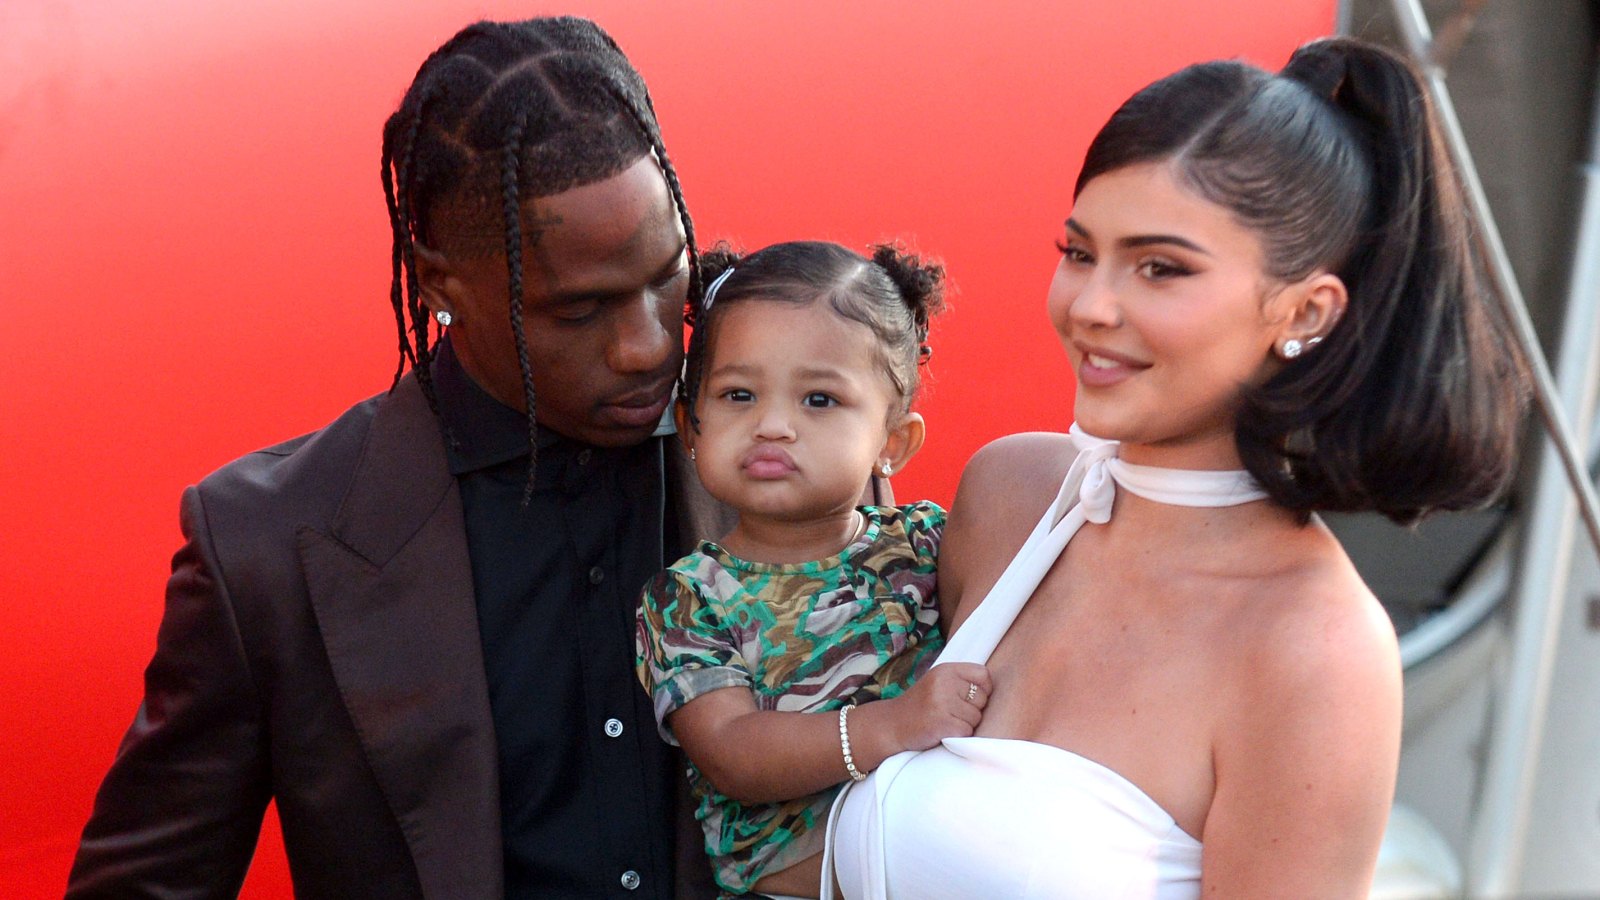 Travis Scott Joins Kylie Jenner at Stormi's 'Stormiworld' 2nd Birthday Party